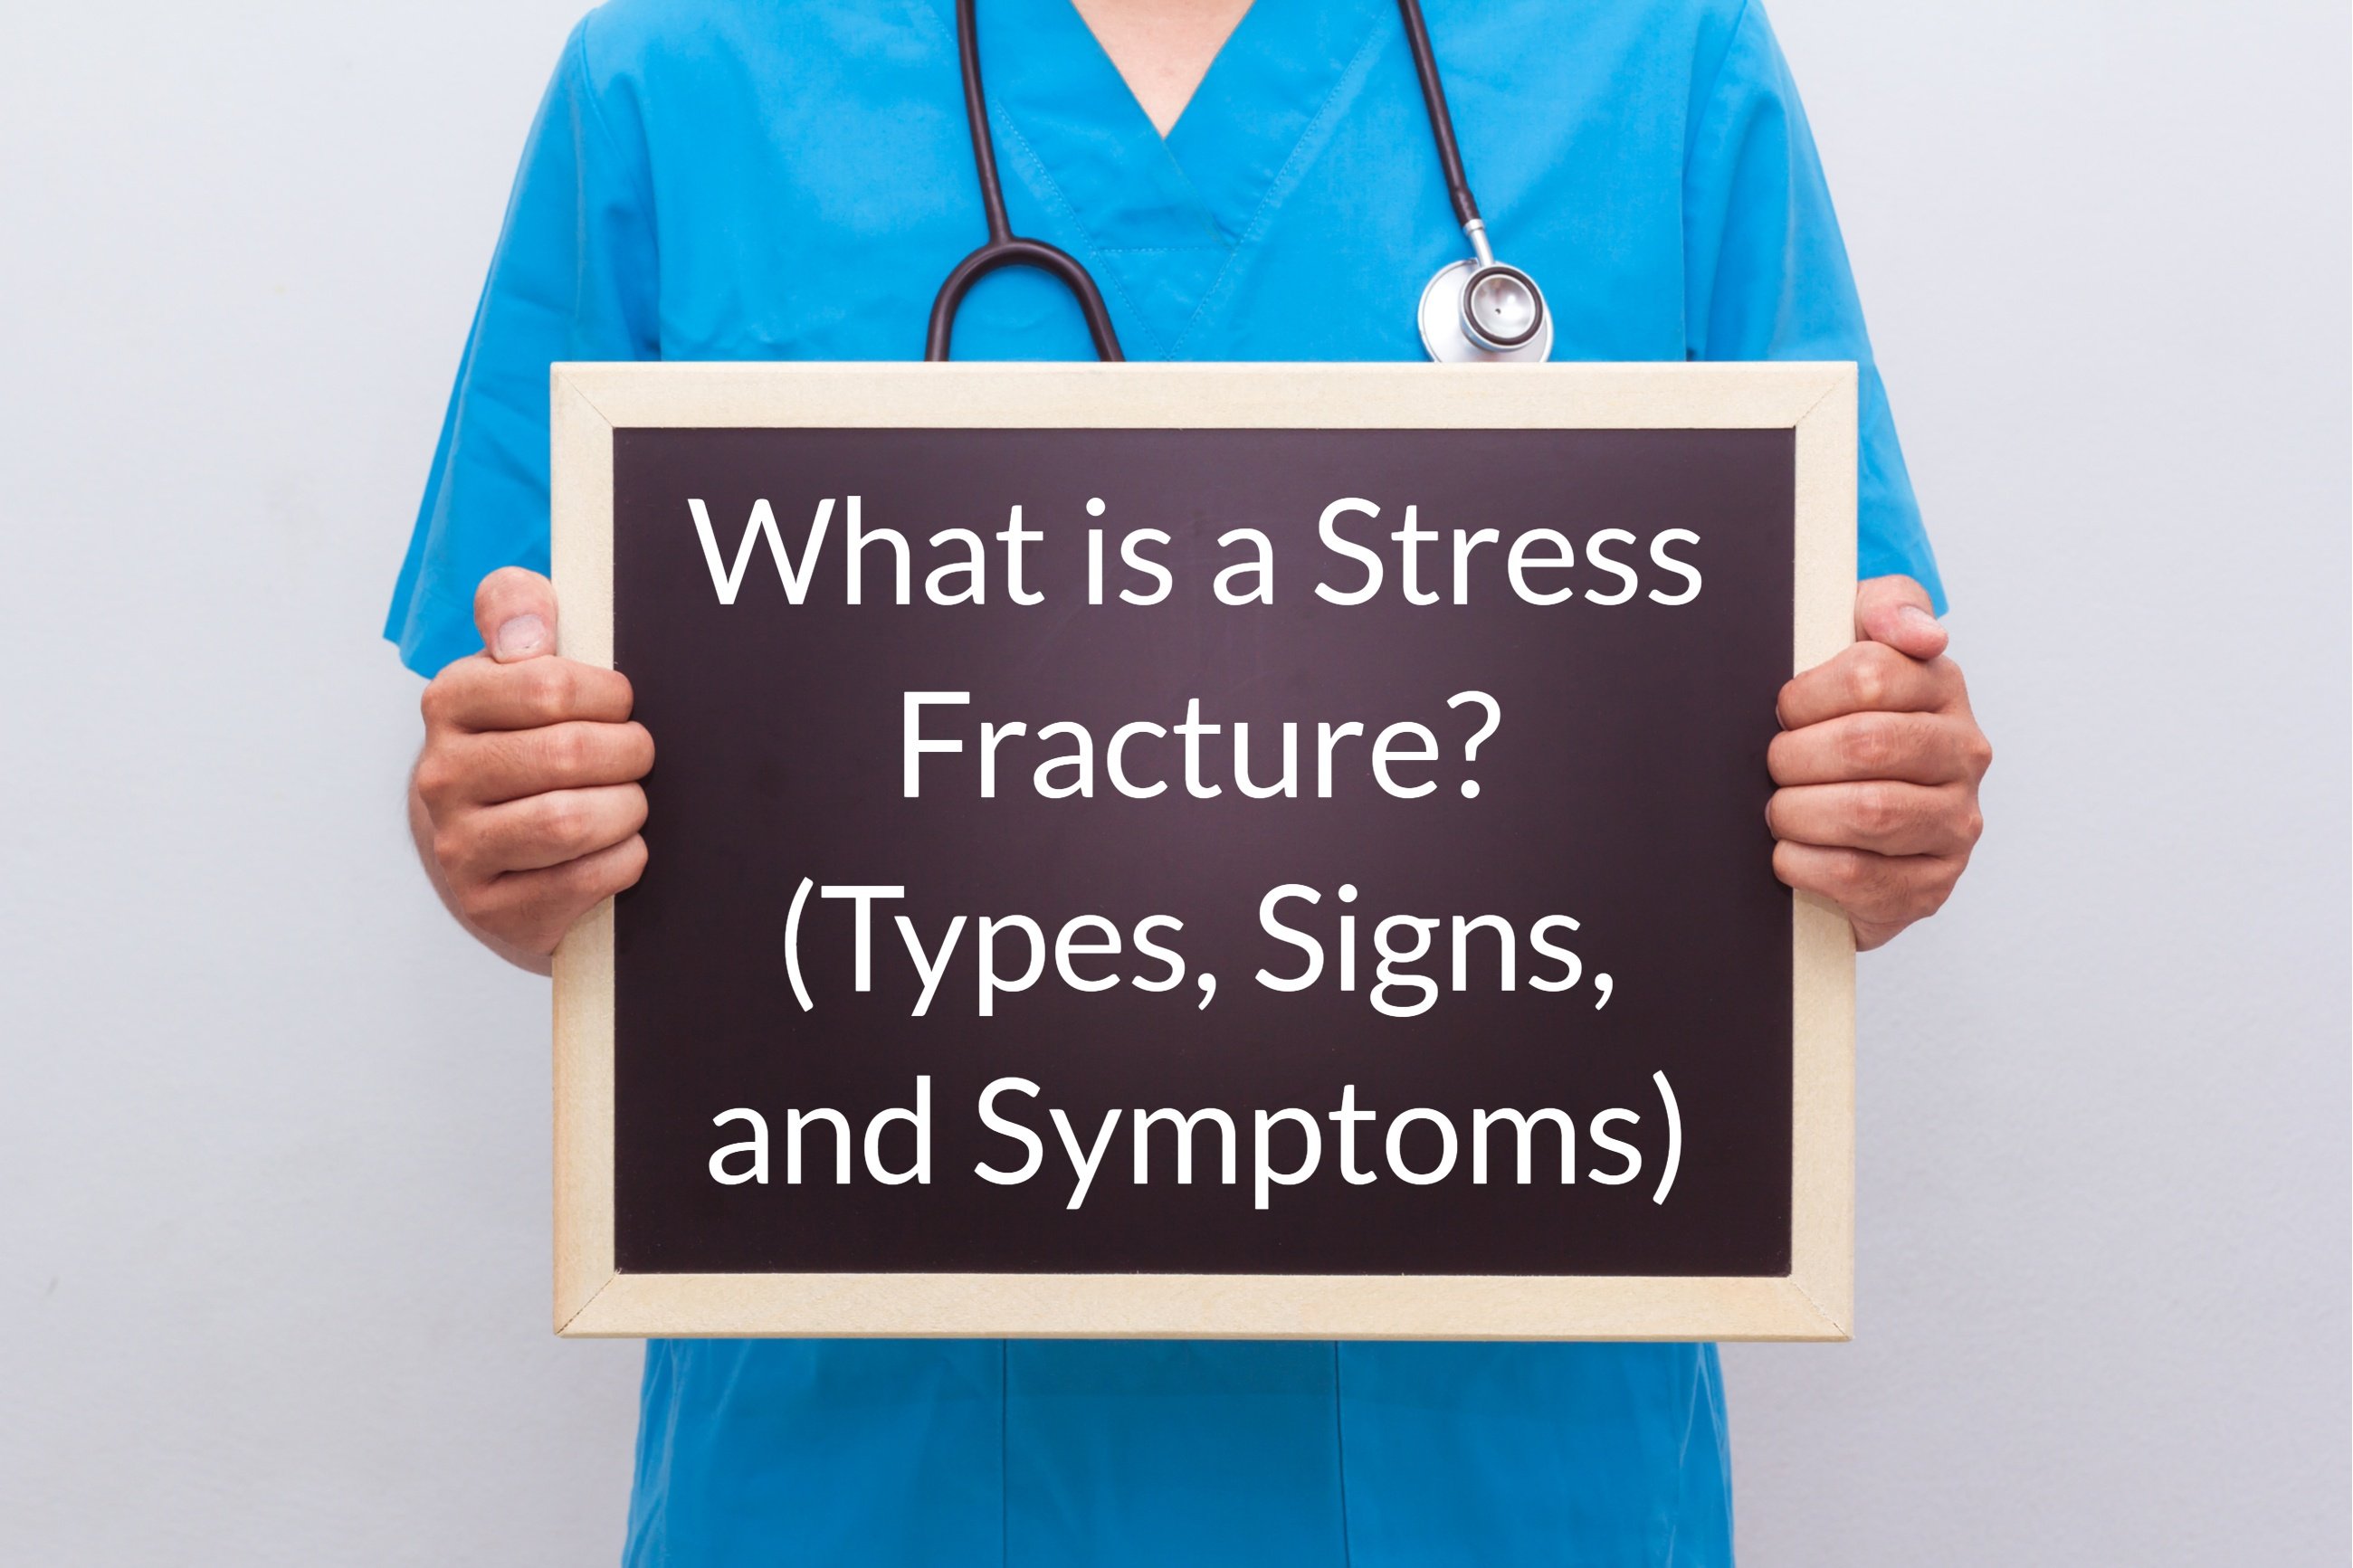 what is a stresst fracture types signs and symptoms2.jpg